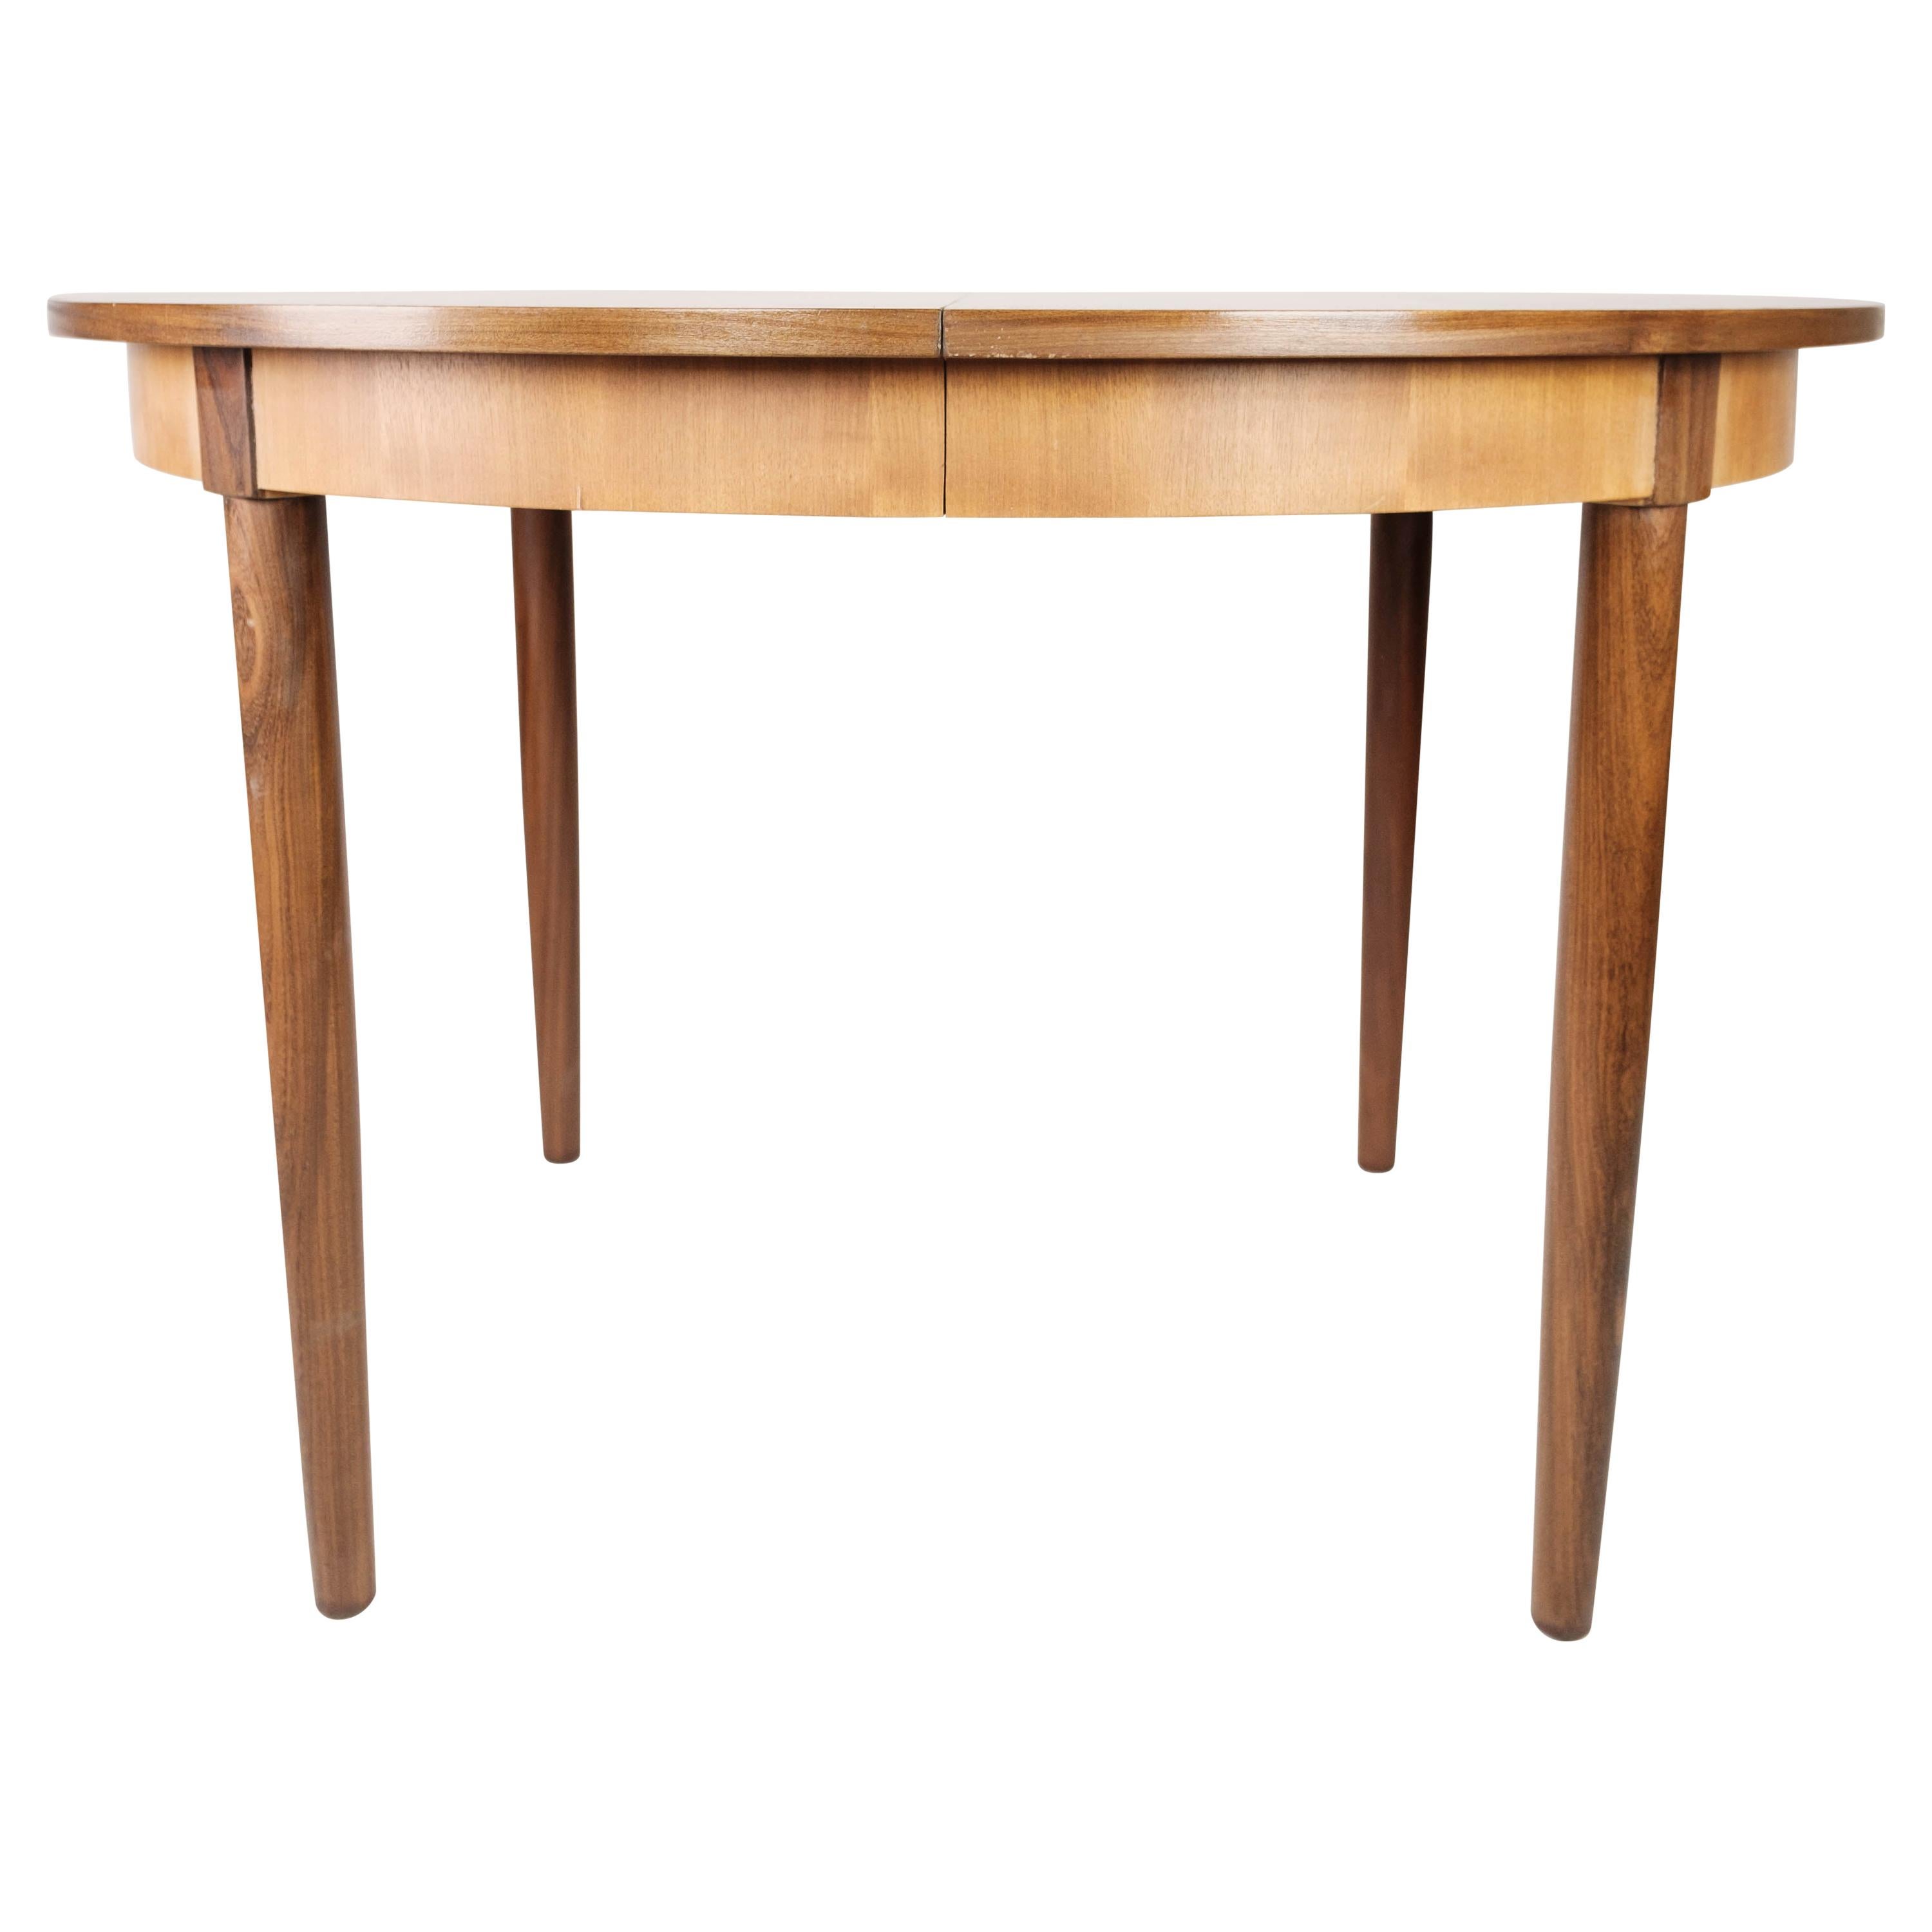 Dining Table in Teak with Extensions, of Danish Design from the 1960s